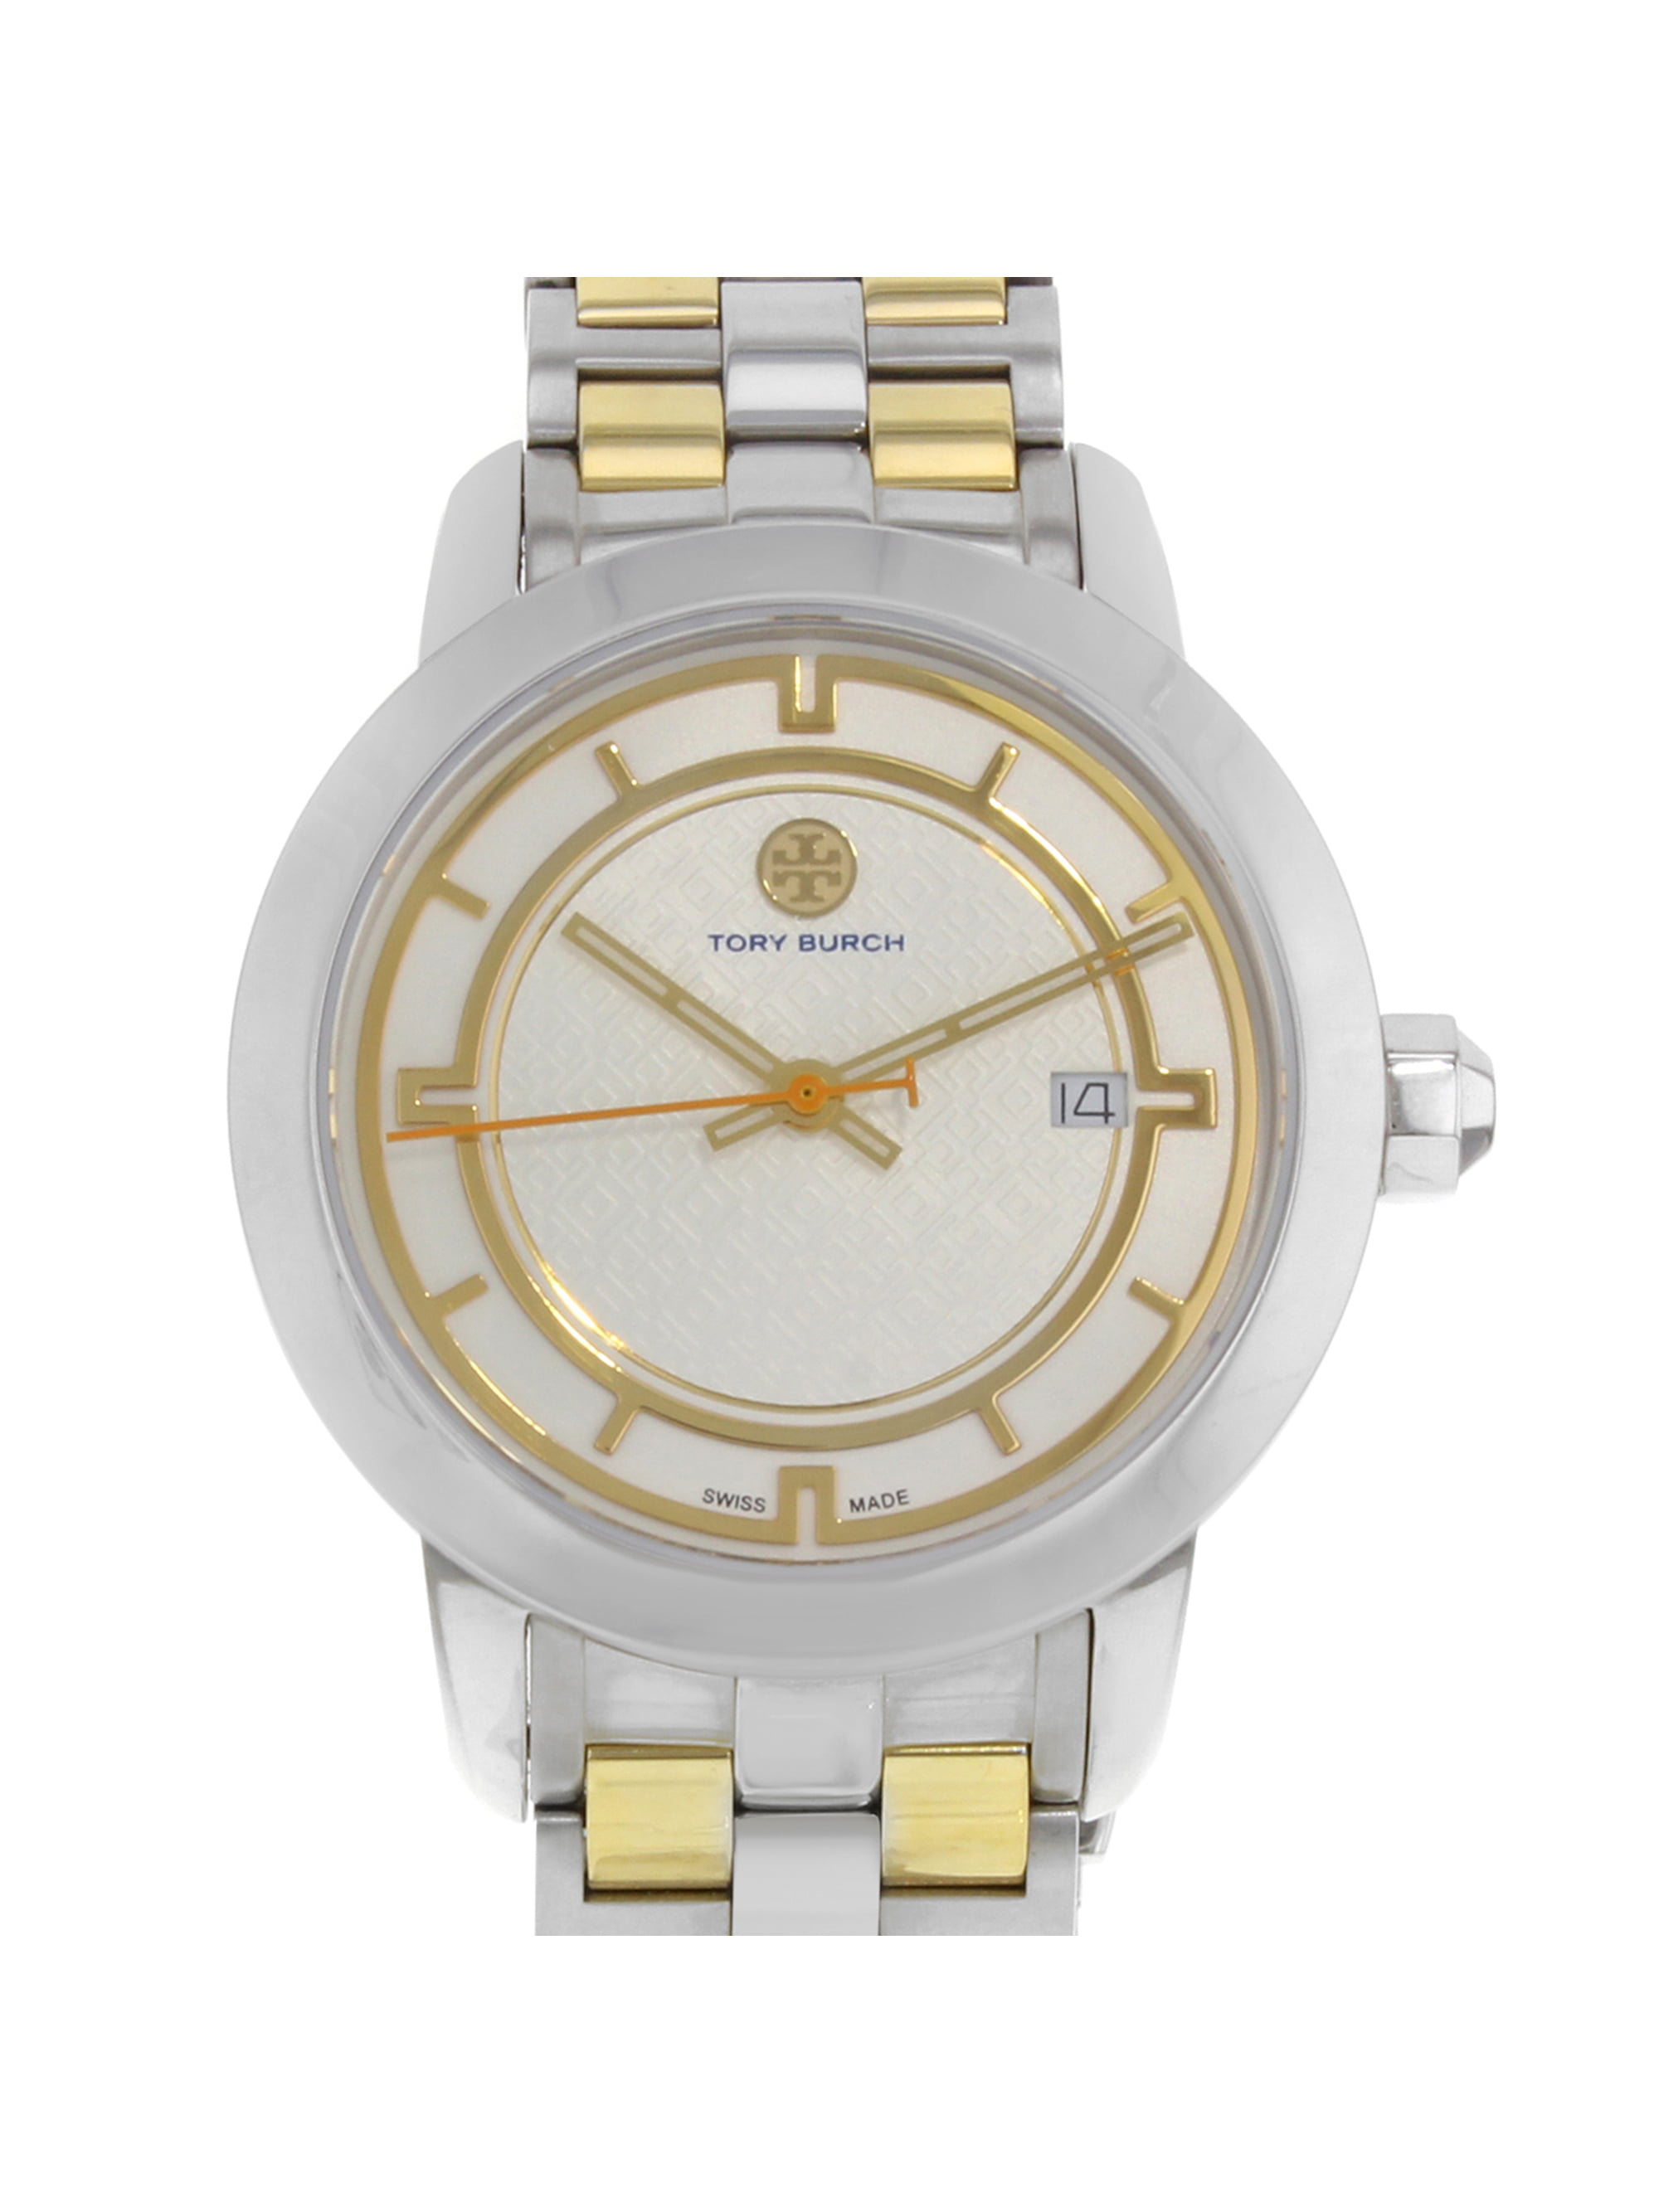 Tory Burch Cream Dial Date Two Tone Steel Quartz Ladies Watch TRB1014  Pre-Owned 